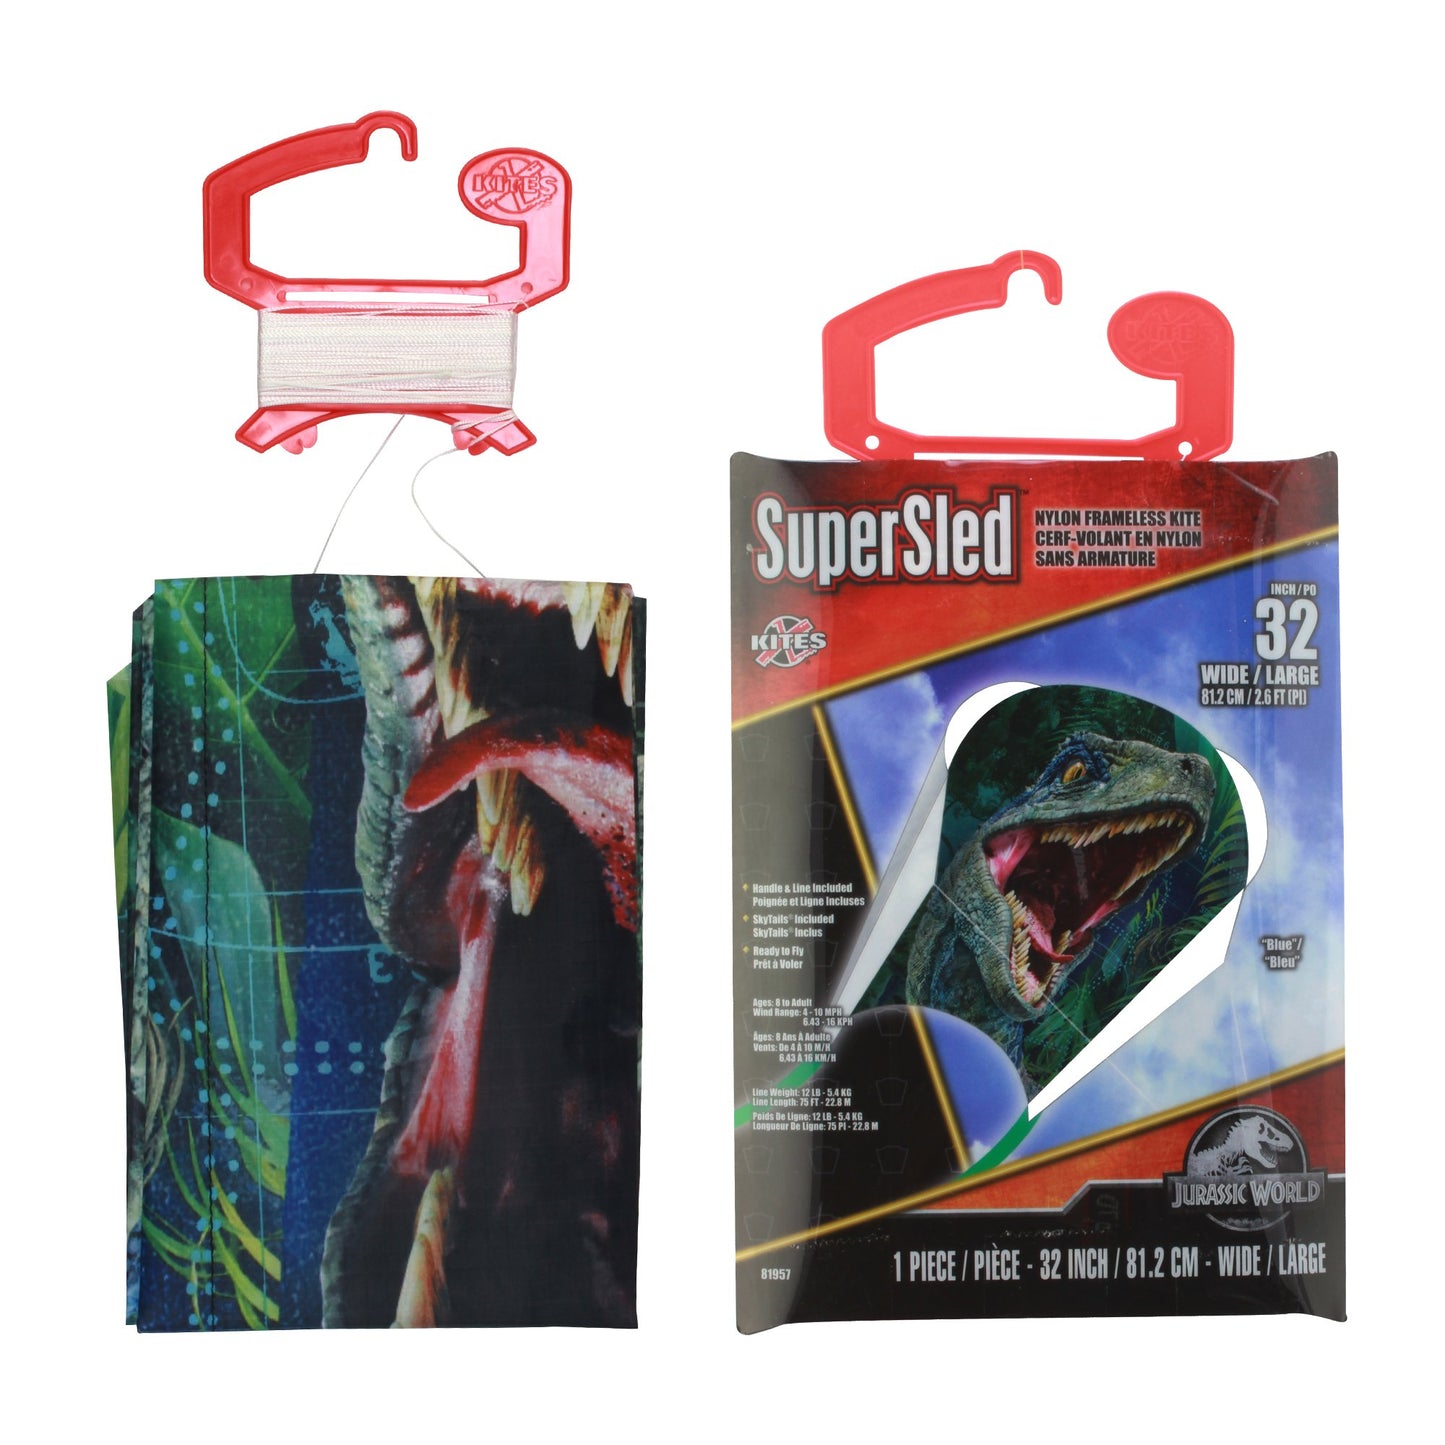 X Kites SuperSled Jurassic World Nylon Kite packaging and contents